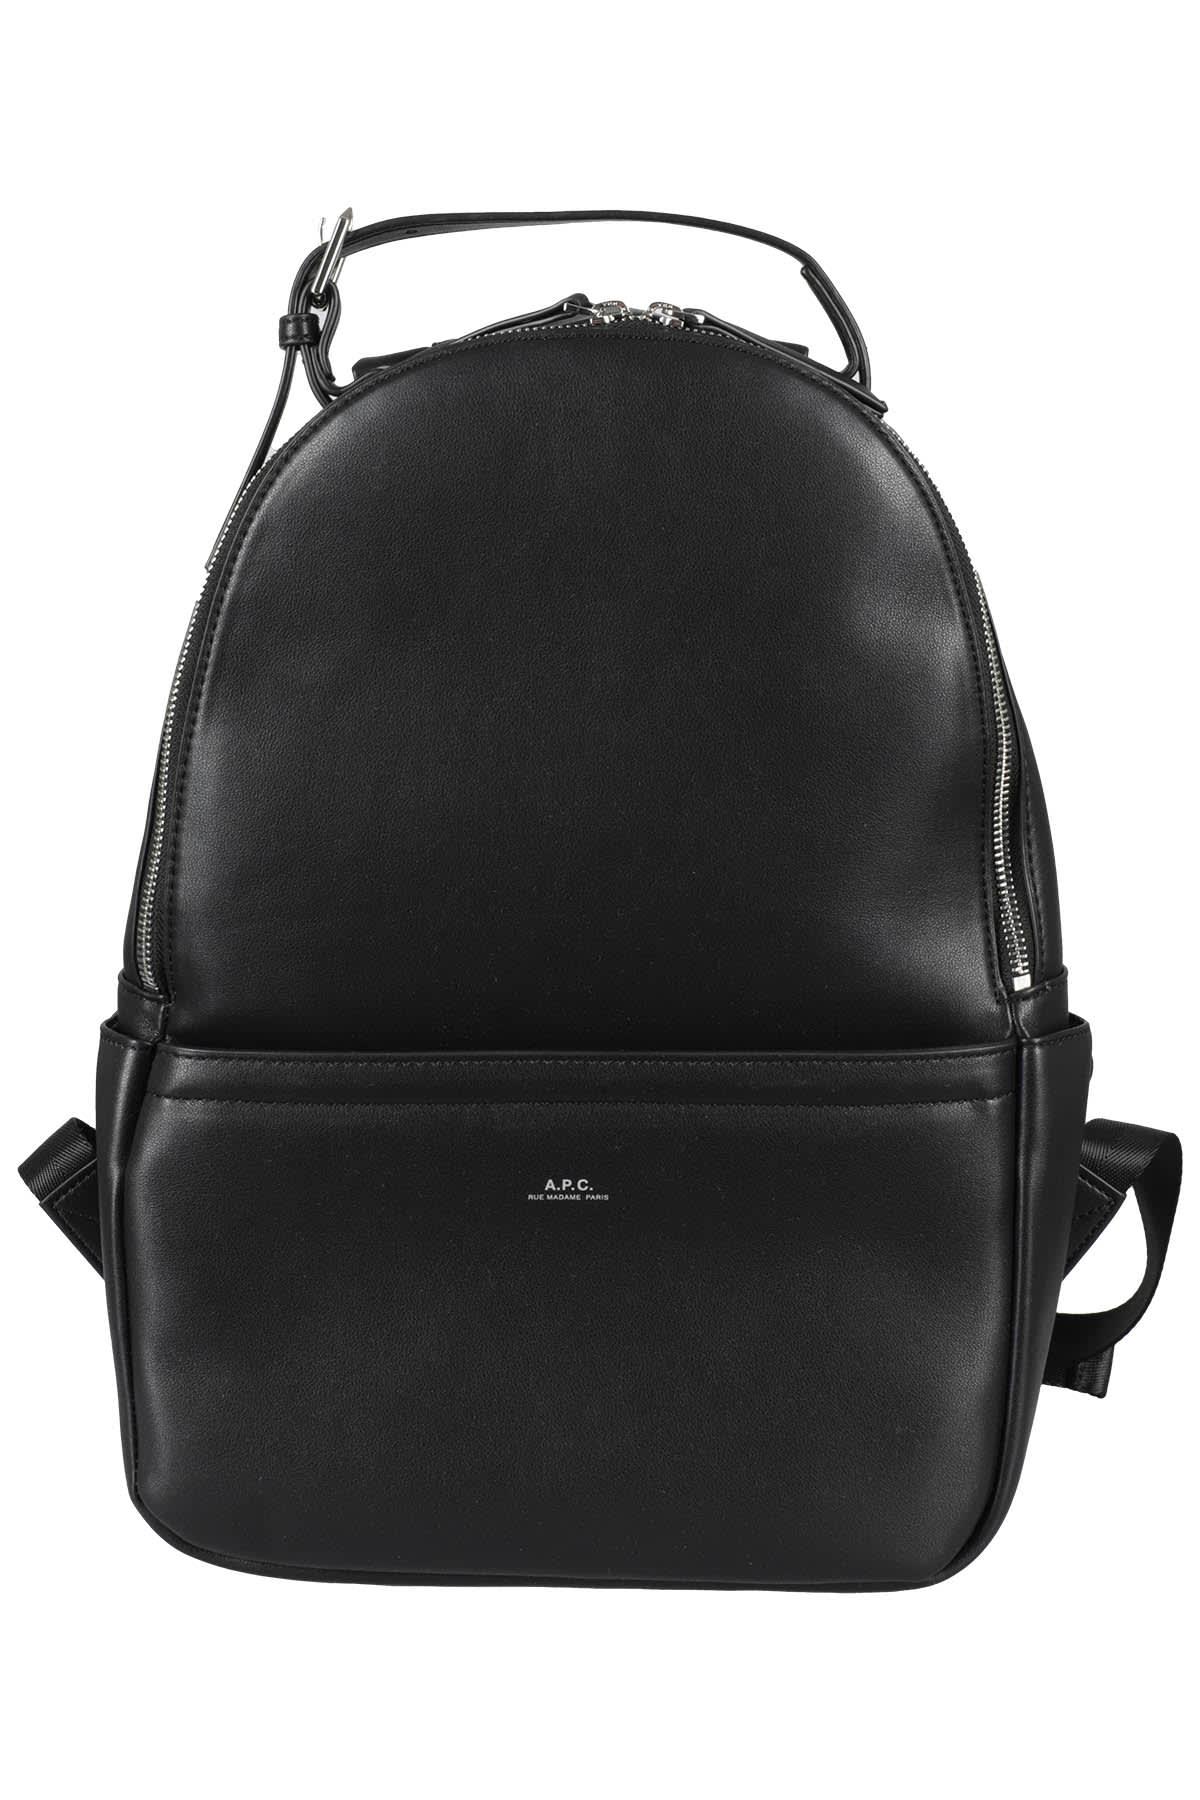 A.P.C. Sac A Dos Nino in Black for Men | Lyst